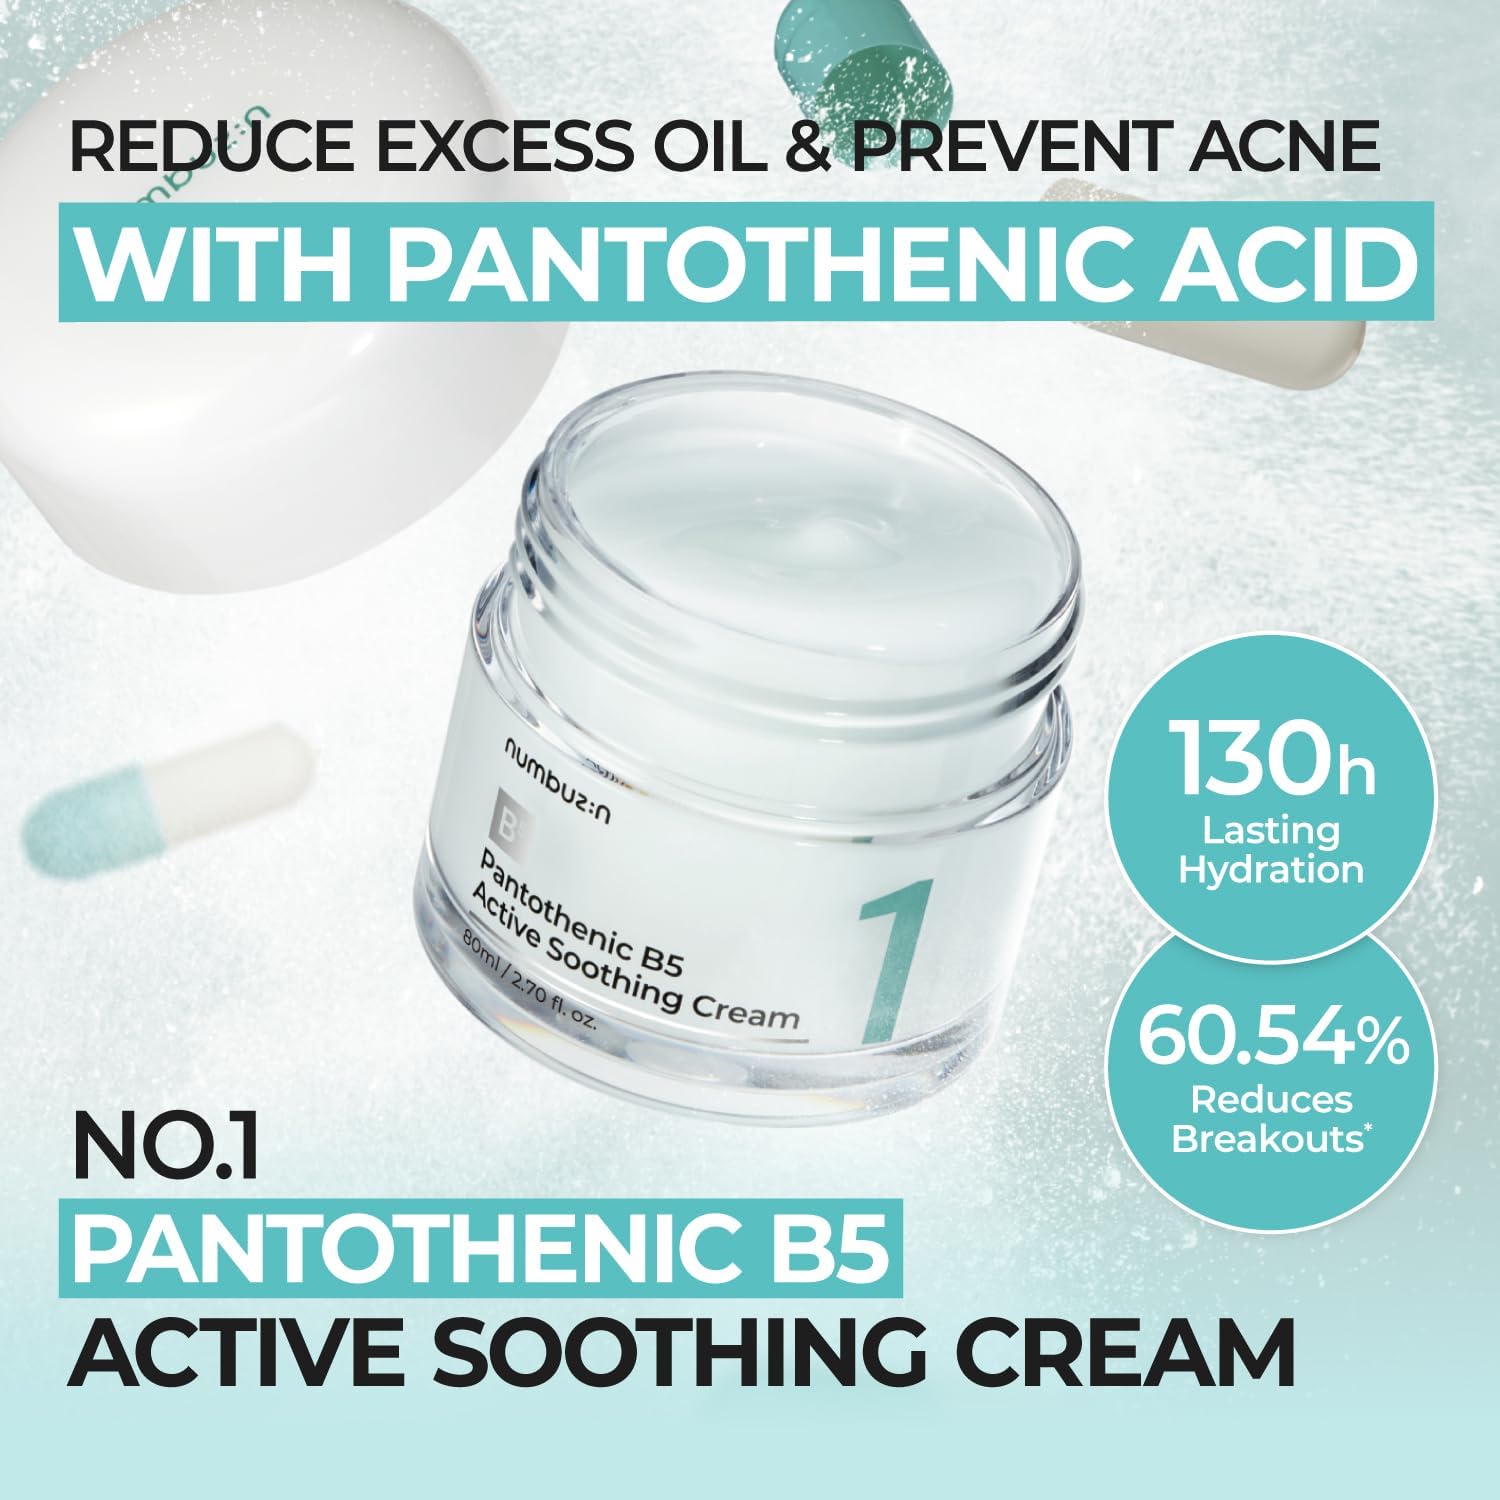 80ml Numbuzin Pantothenic B5 Active Soothing Cream - a gentle formula with vitamin B5 for skin relief.